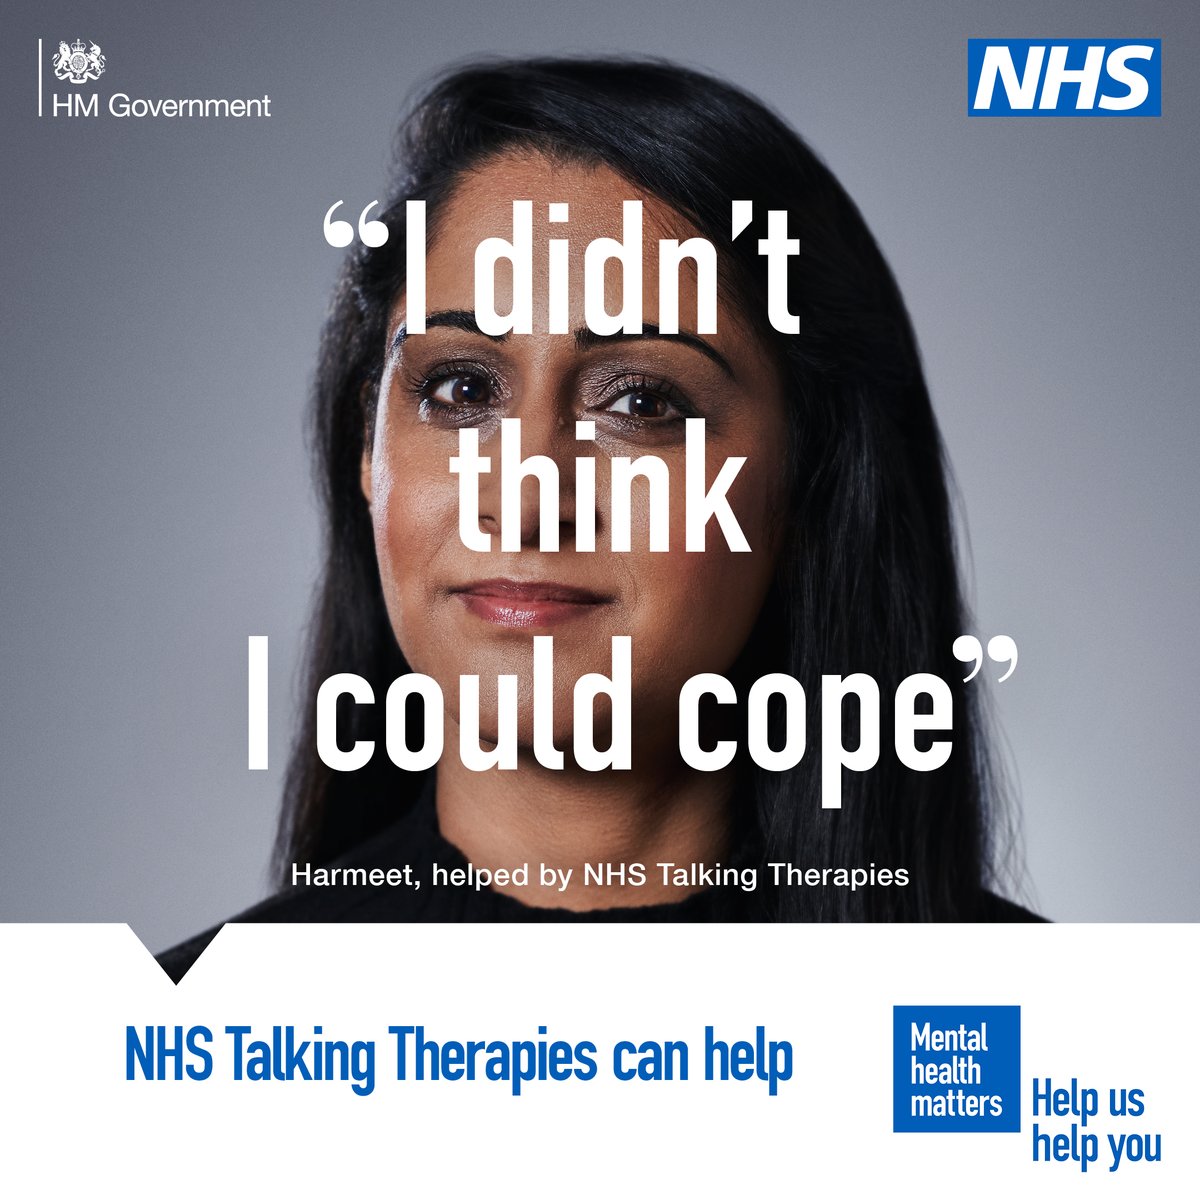 NHS Talking Therapies can help if you’re struggling with feelings of depression, excessive worry, social anxiety or post-traumatic stress disorder (PTSD). The service is effective, confidential and free. Your GP can refer you or refer yourself at nhs.uk/talk.